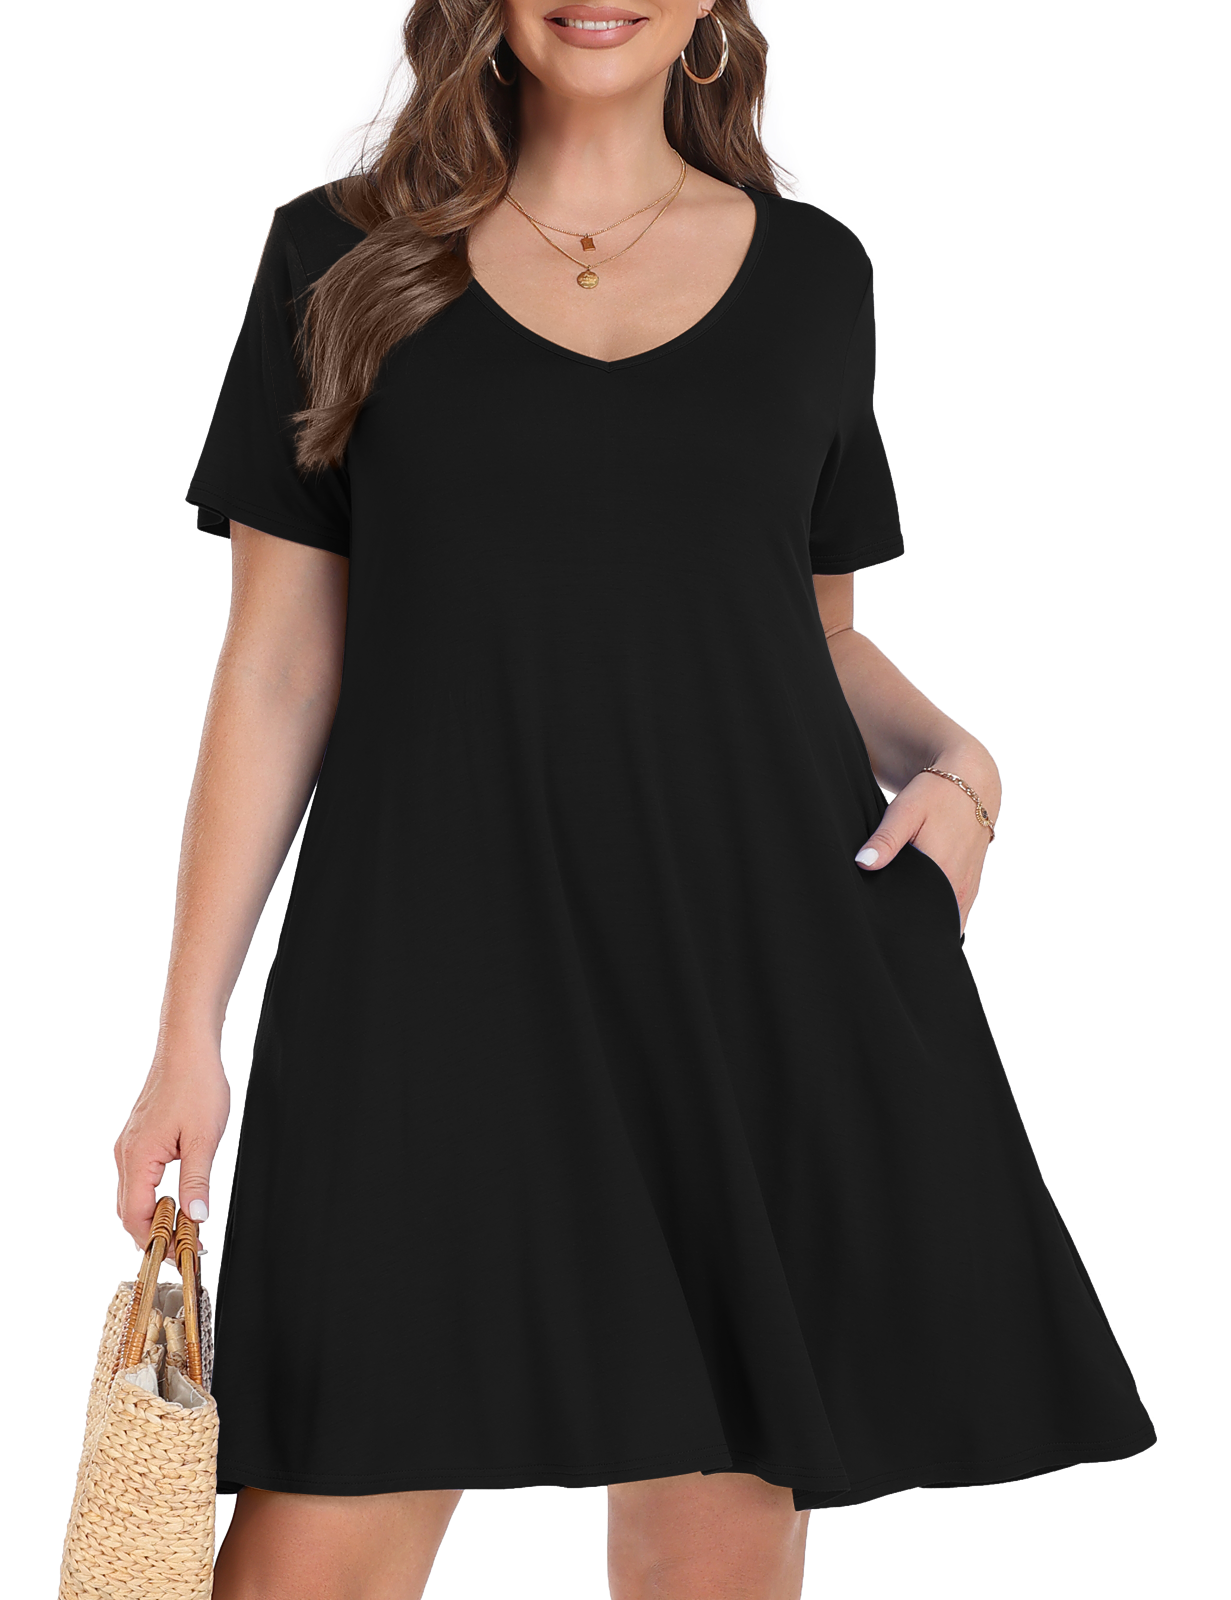 Plus Size Black Dresses 4X for Women, VEPKUL V Neck T Shirt Dress 2024 Short Sleeve Casual Loose Swing Summer Dress with Pockets - image 1 of 9